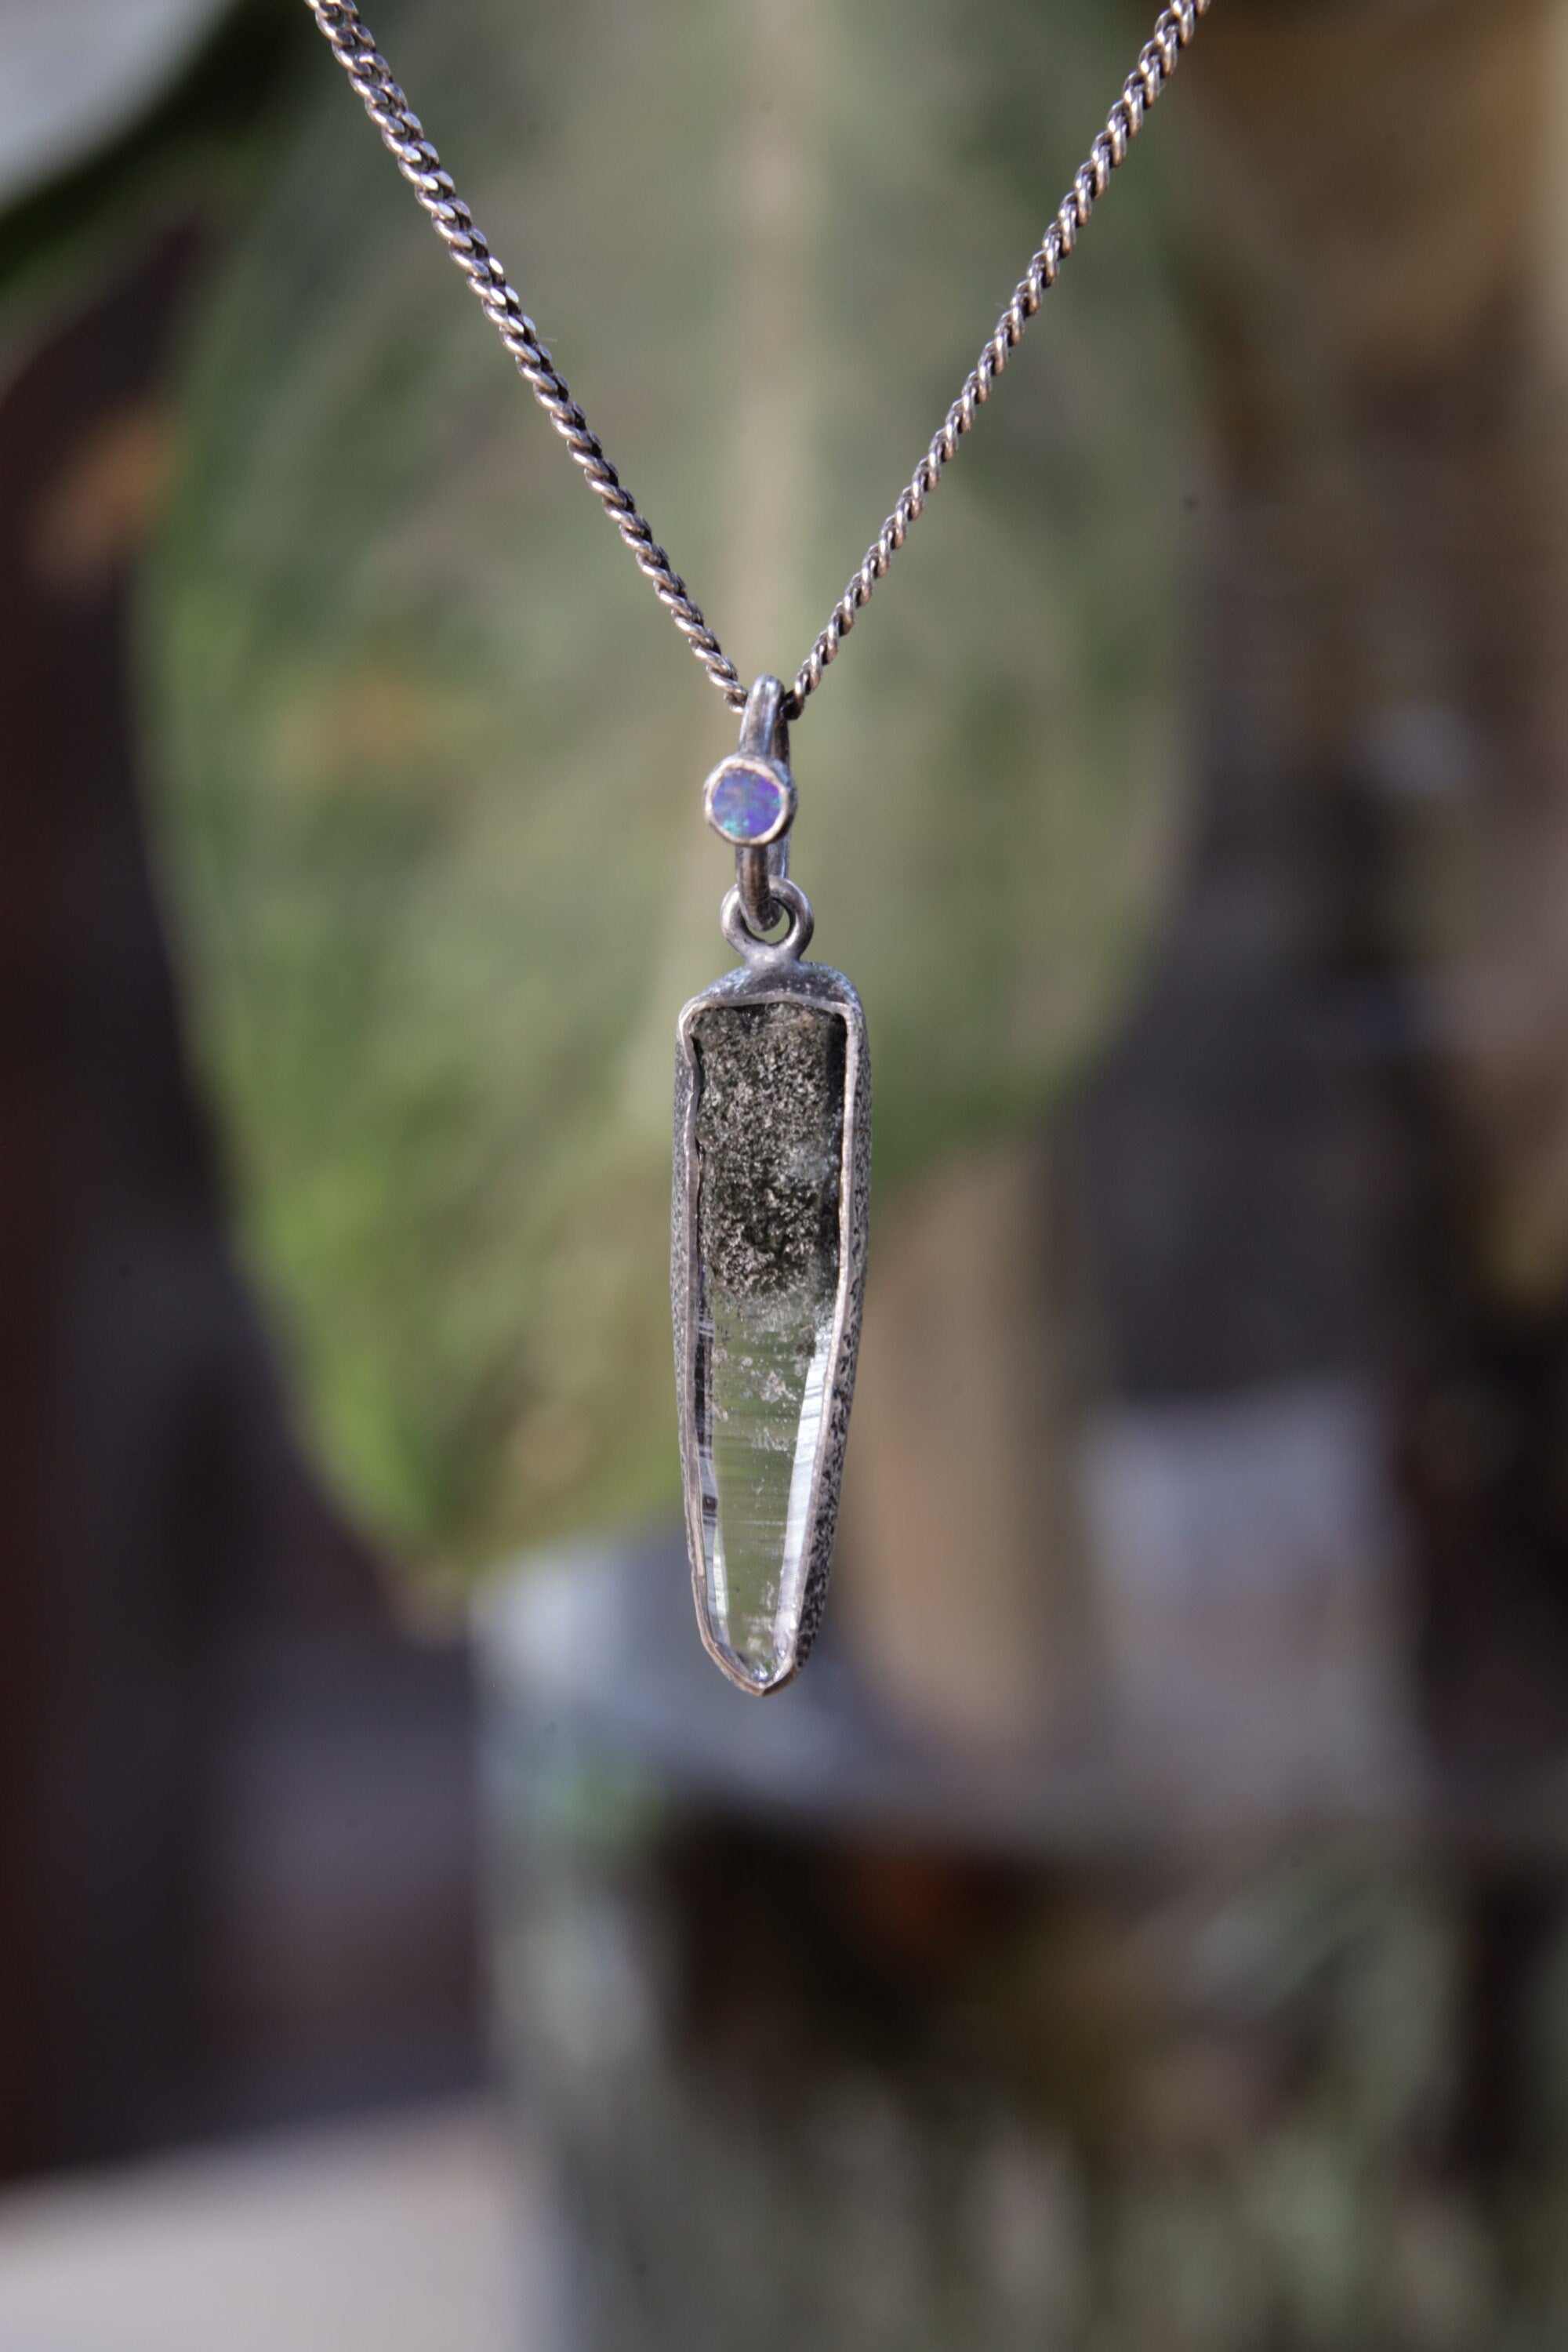 Himalayan Whisper: Sterling Silver Pendant with Himalayan Laser Quartz and Opal - Oxidized & Sand Textured